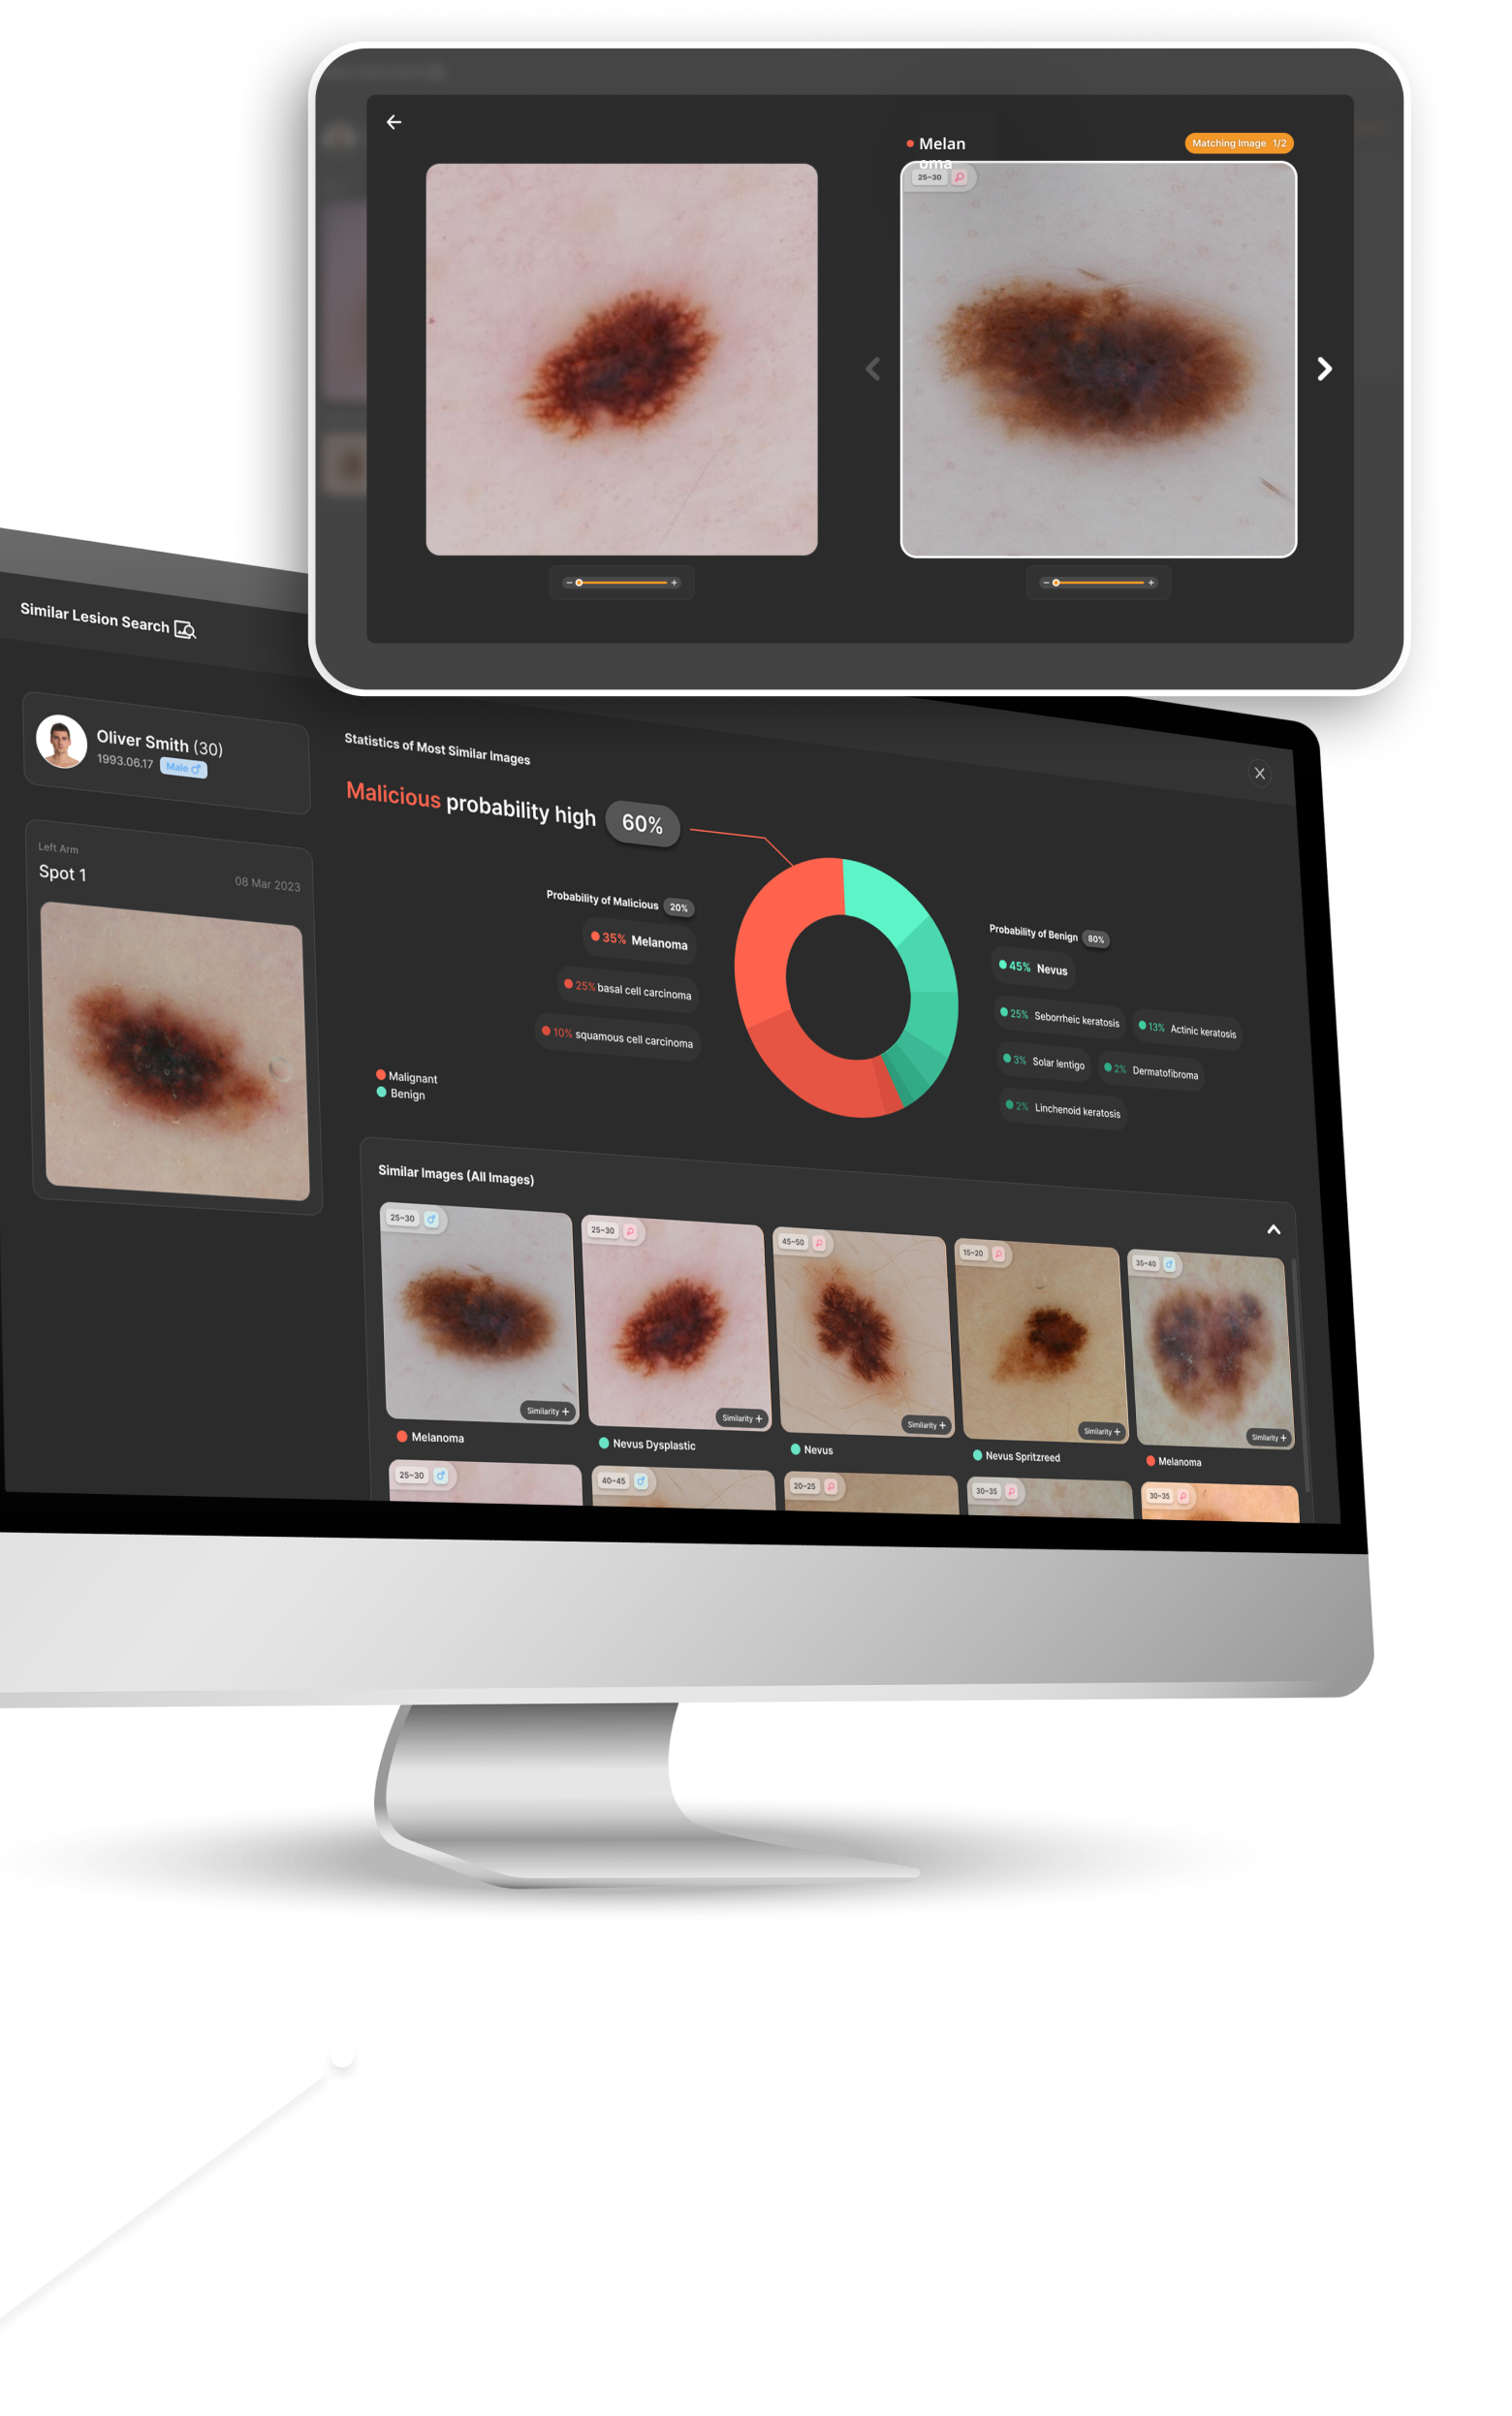 Utilize visual search technology, the Similar Lesion Search features screen for analyzing images with high similarity and disease information labeled on each image